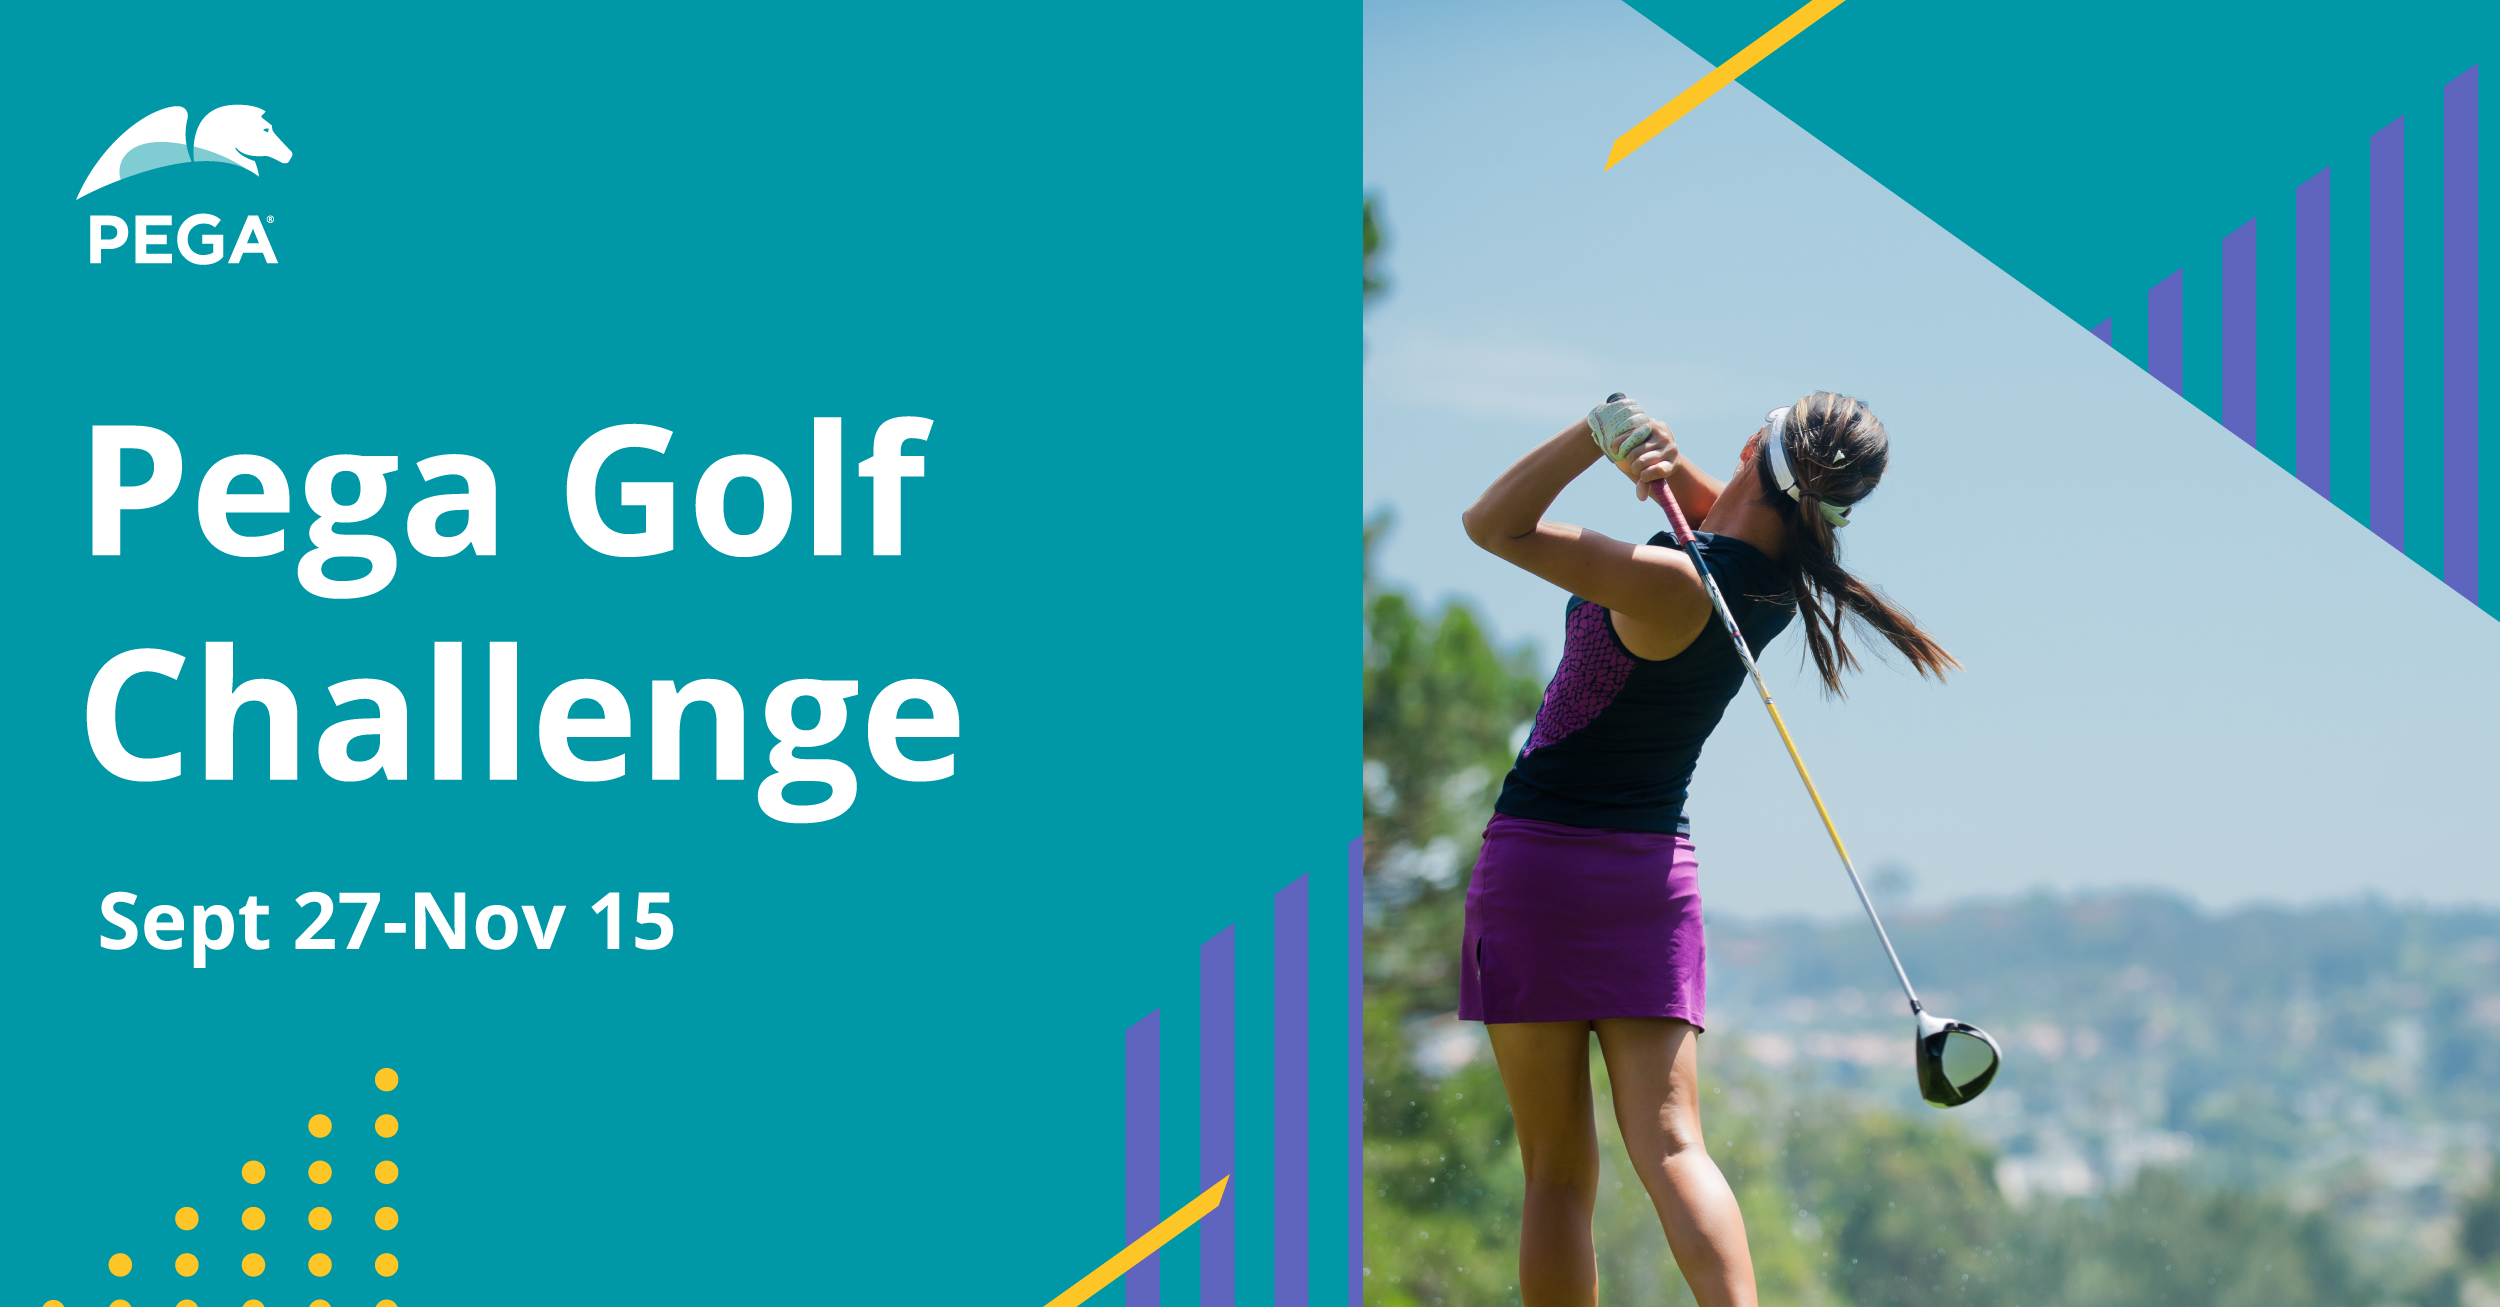 A banner announcing the Pega Golf Challenge features a woman playing golf